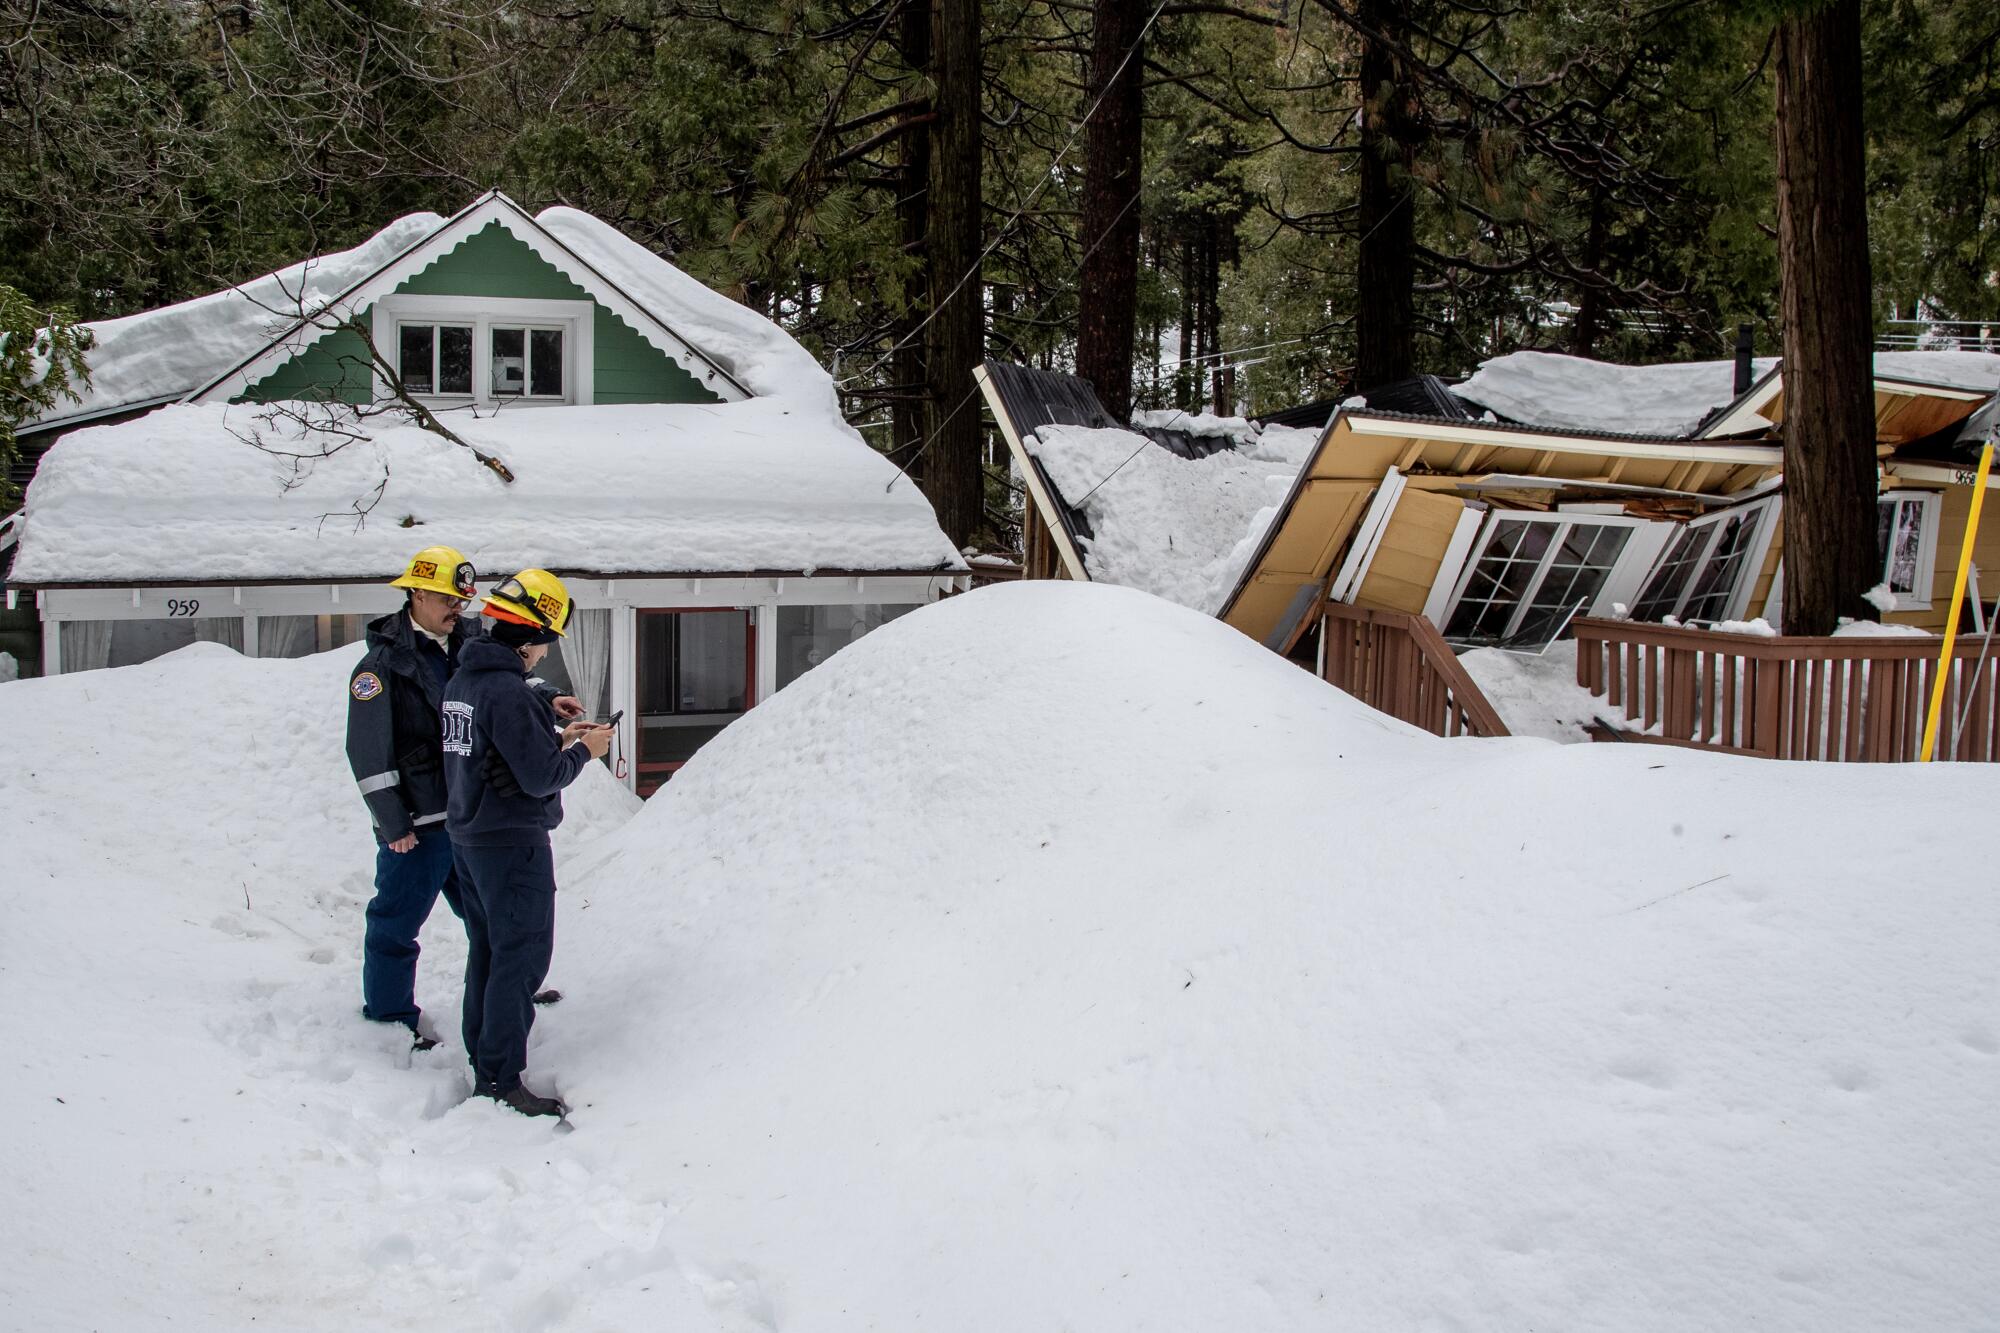 Firefighters stand near a snow covered building.